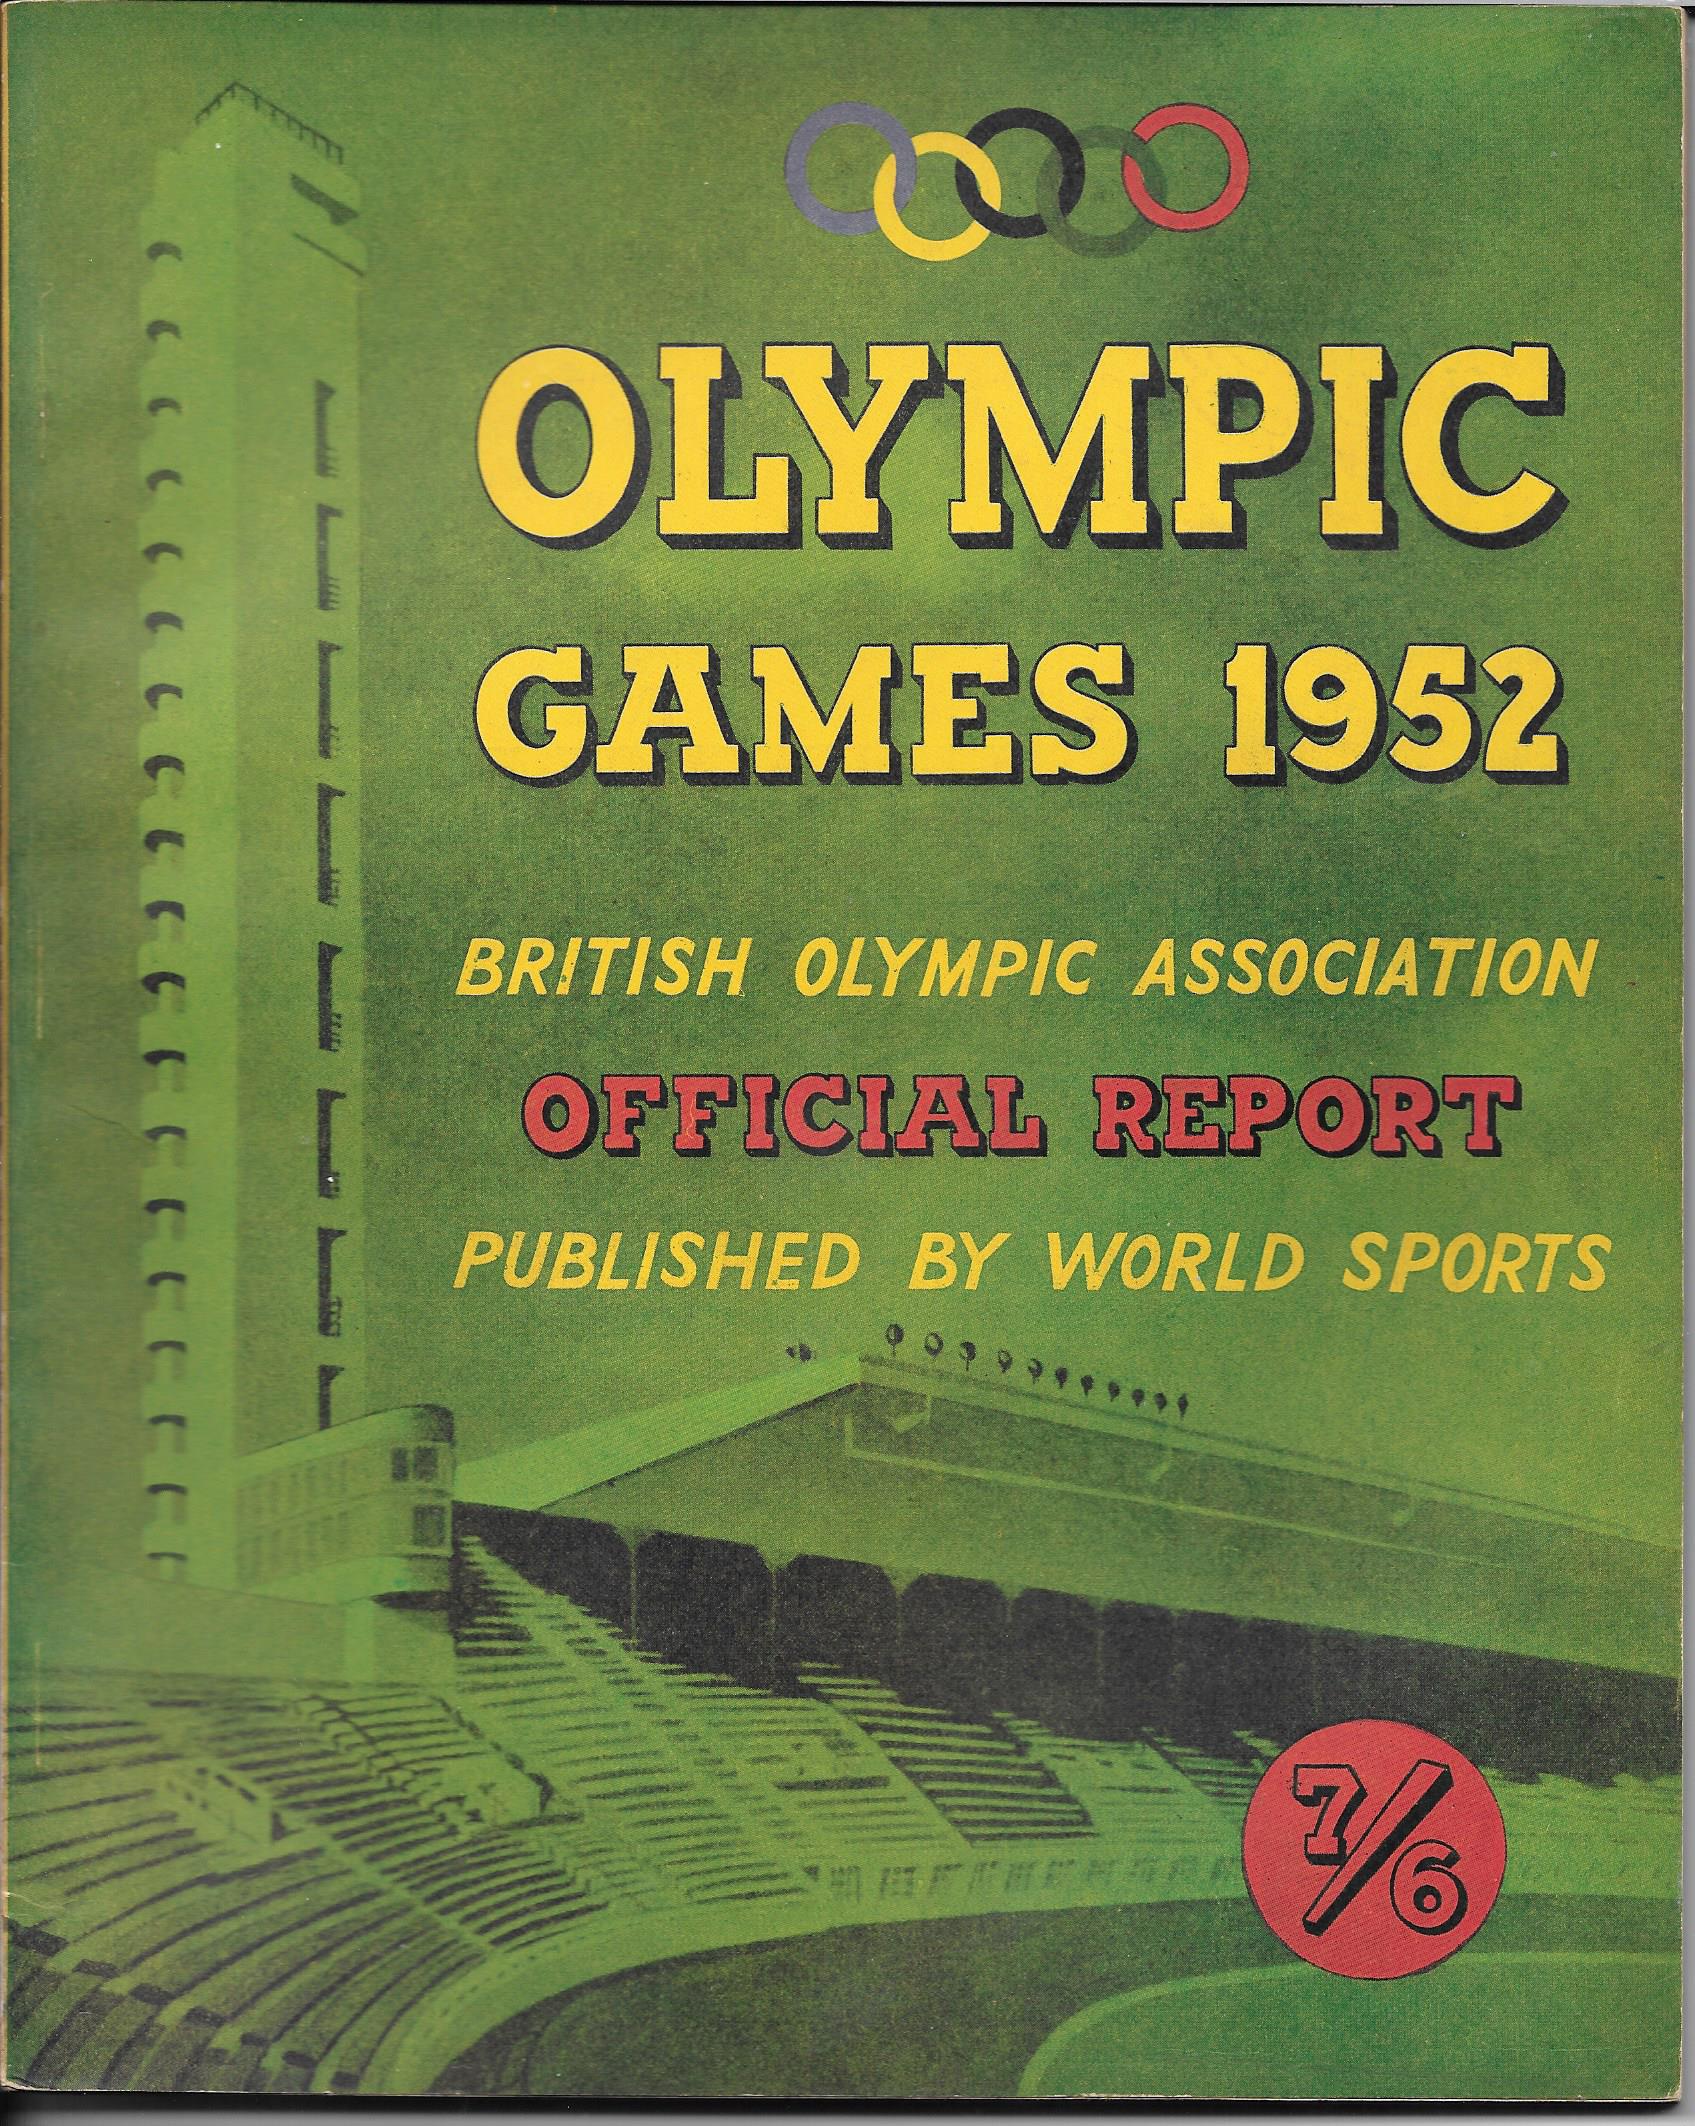 OLYMPICS - OFFICIAL REPORT OF THE 1952 OLYMPICS